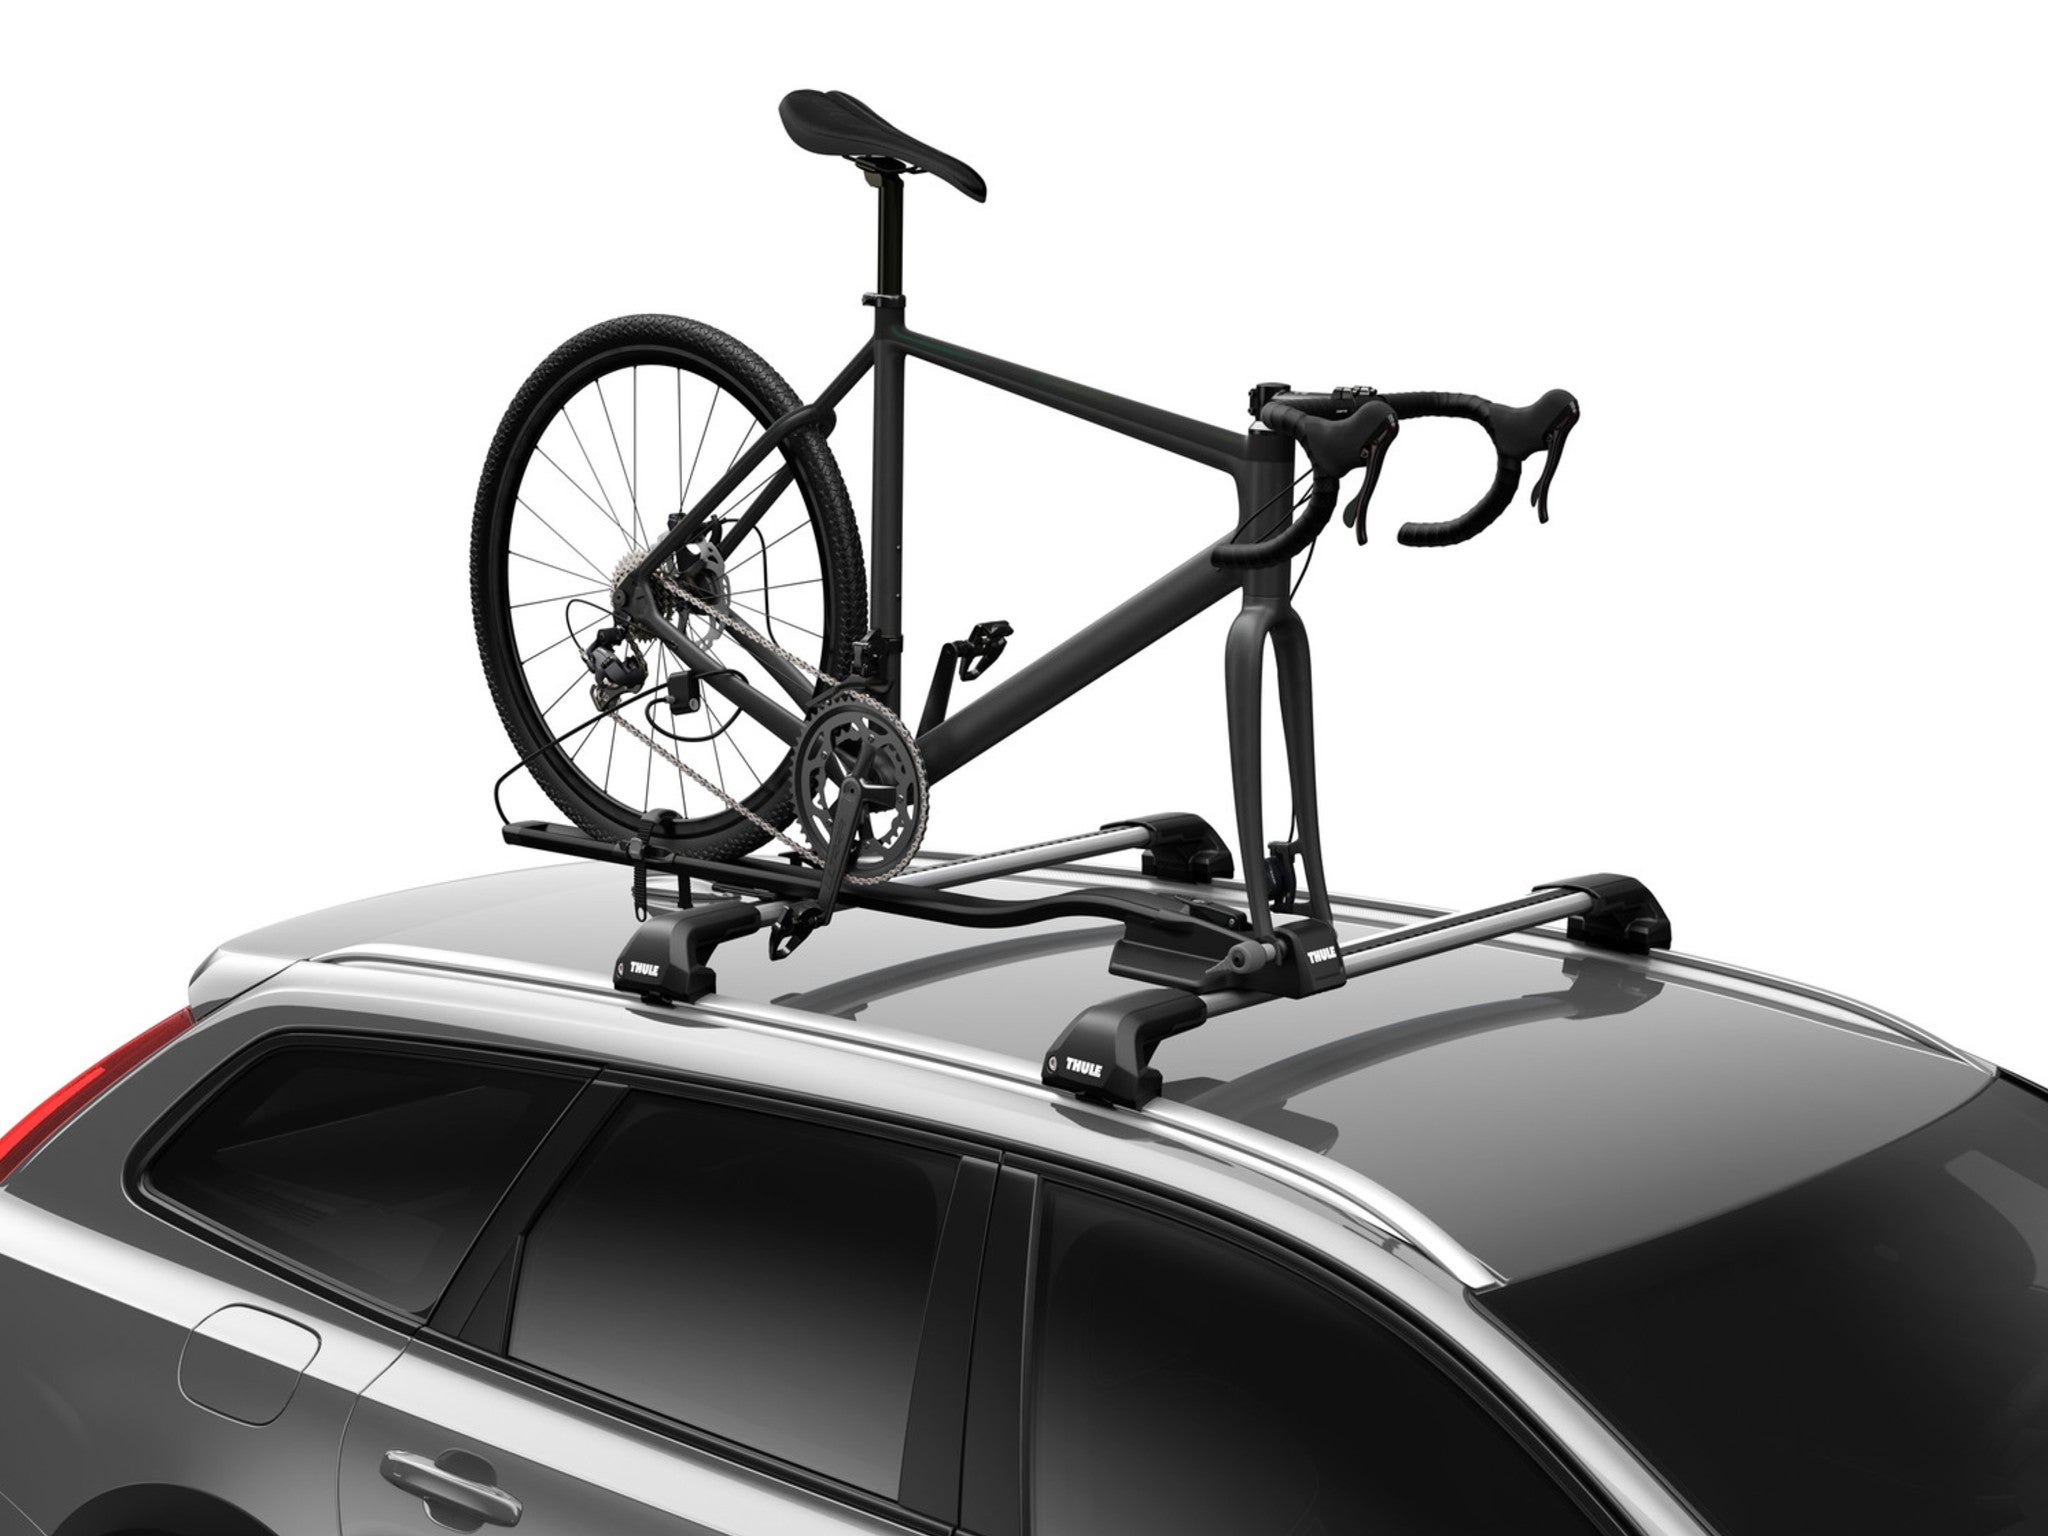 Thule fastride 564  indybest.jpeg